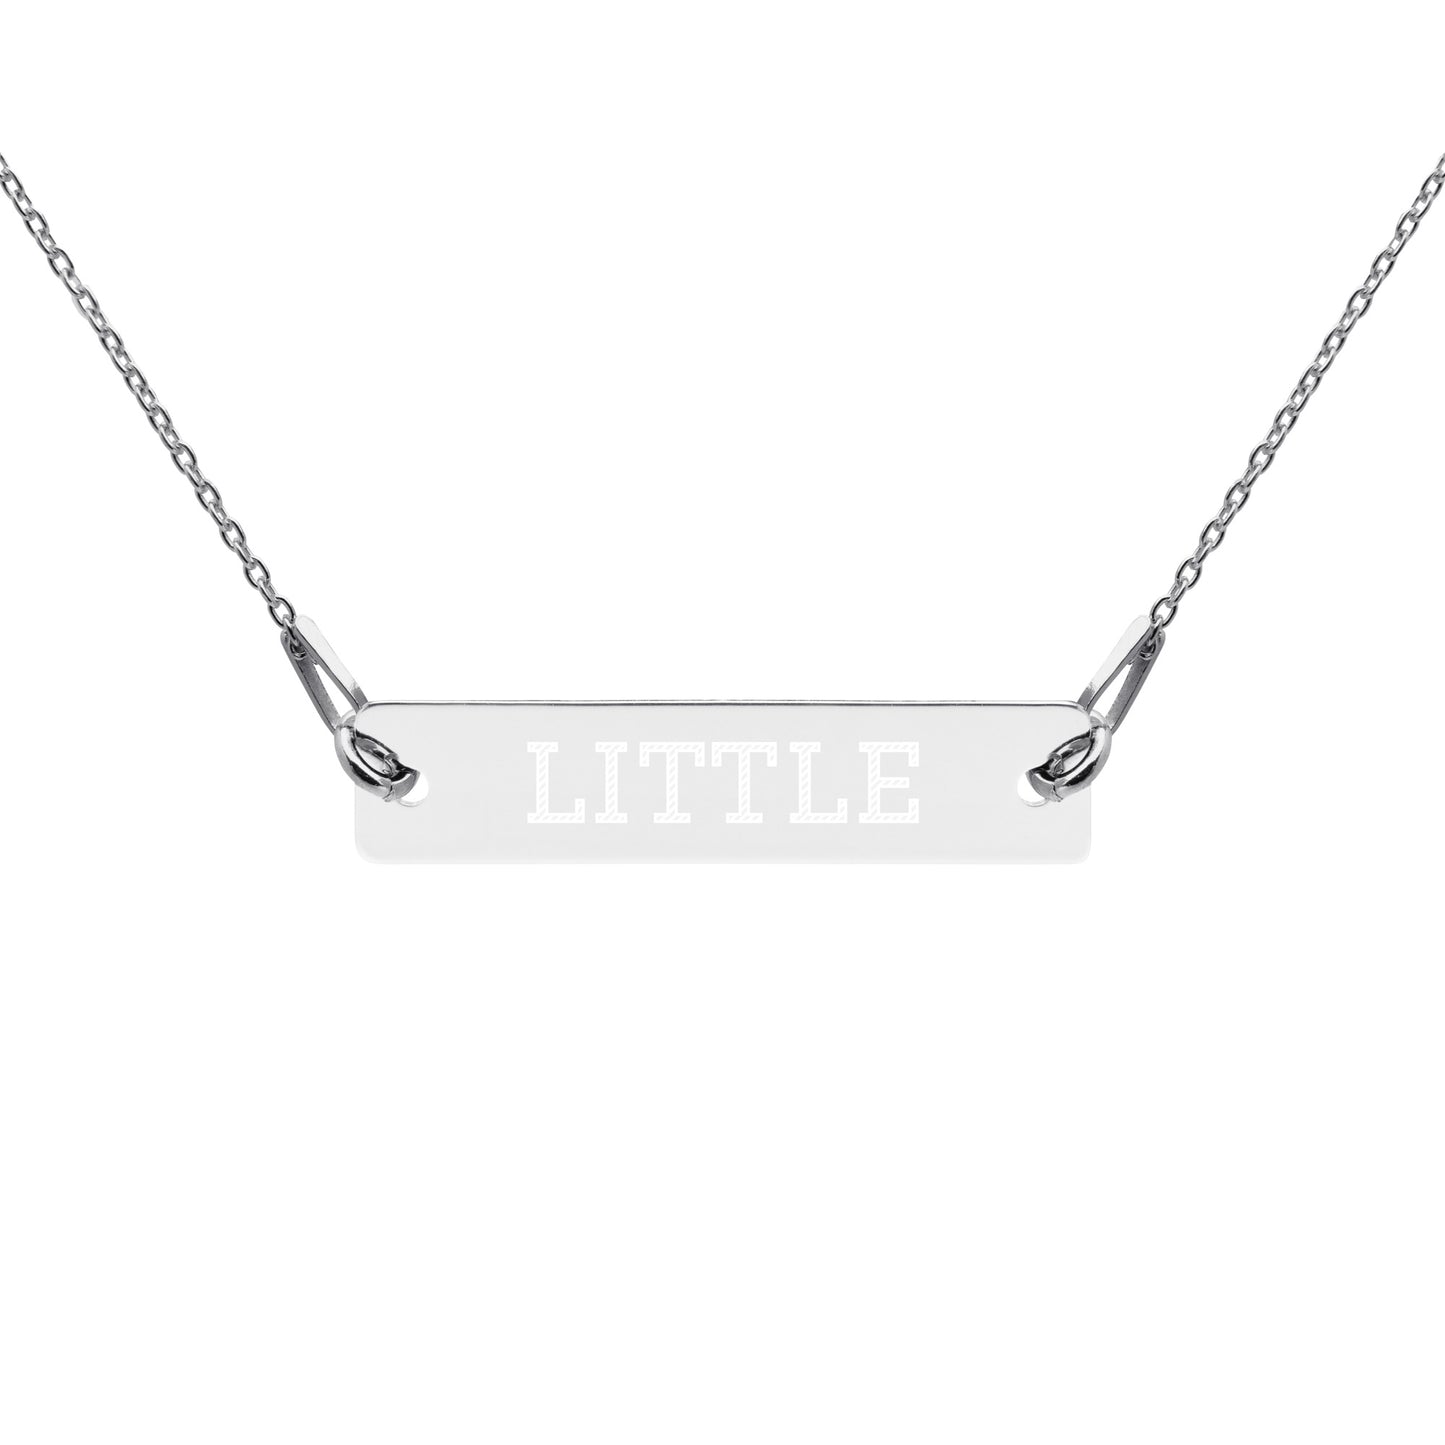 ABDL 'Little' Engraved Silver Bar Chain Necklace